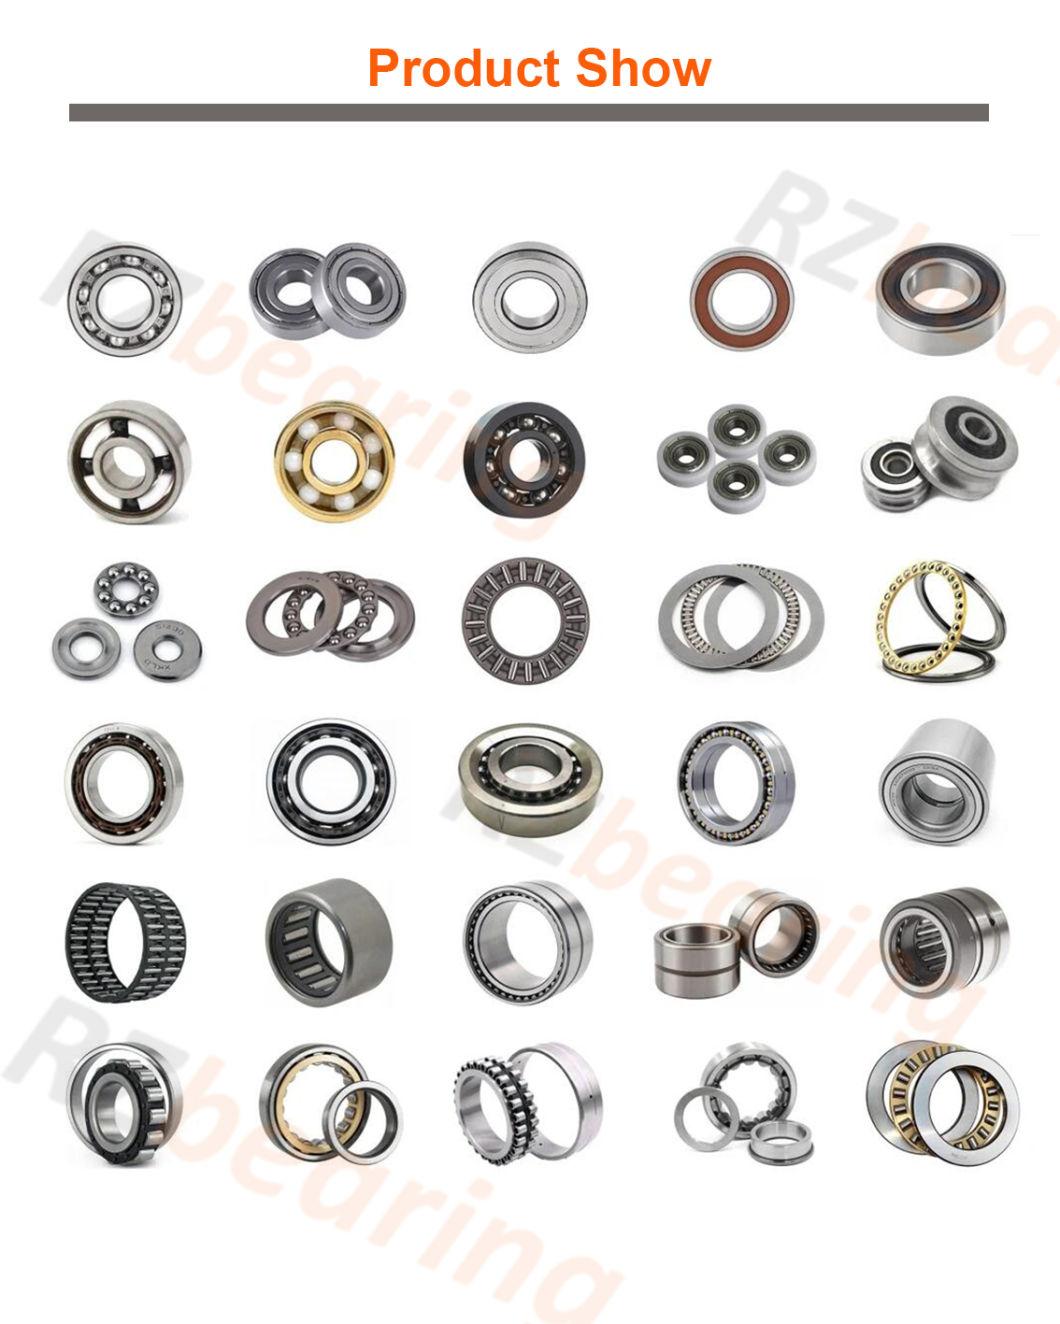 Bearings Thrust Ball Bearings 51105 for Trailers Automobile Parts Motor Bearing with High Quality